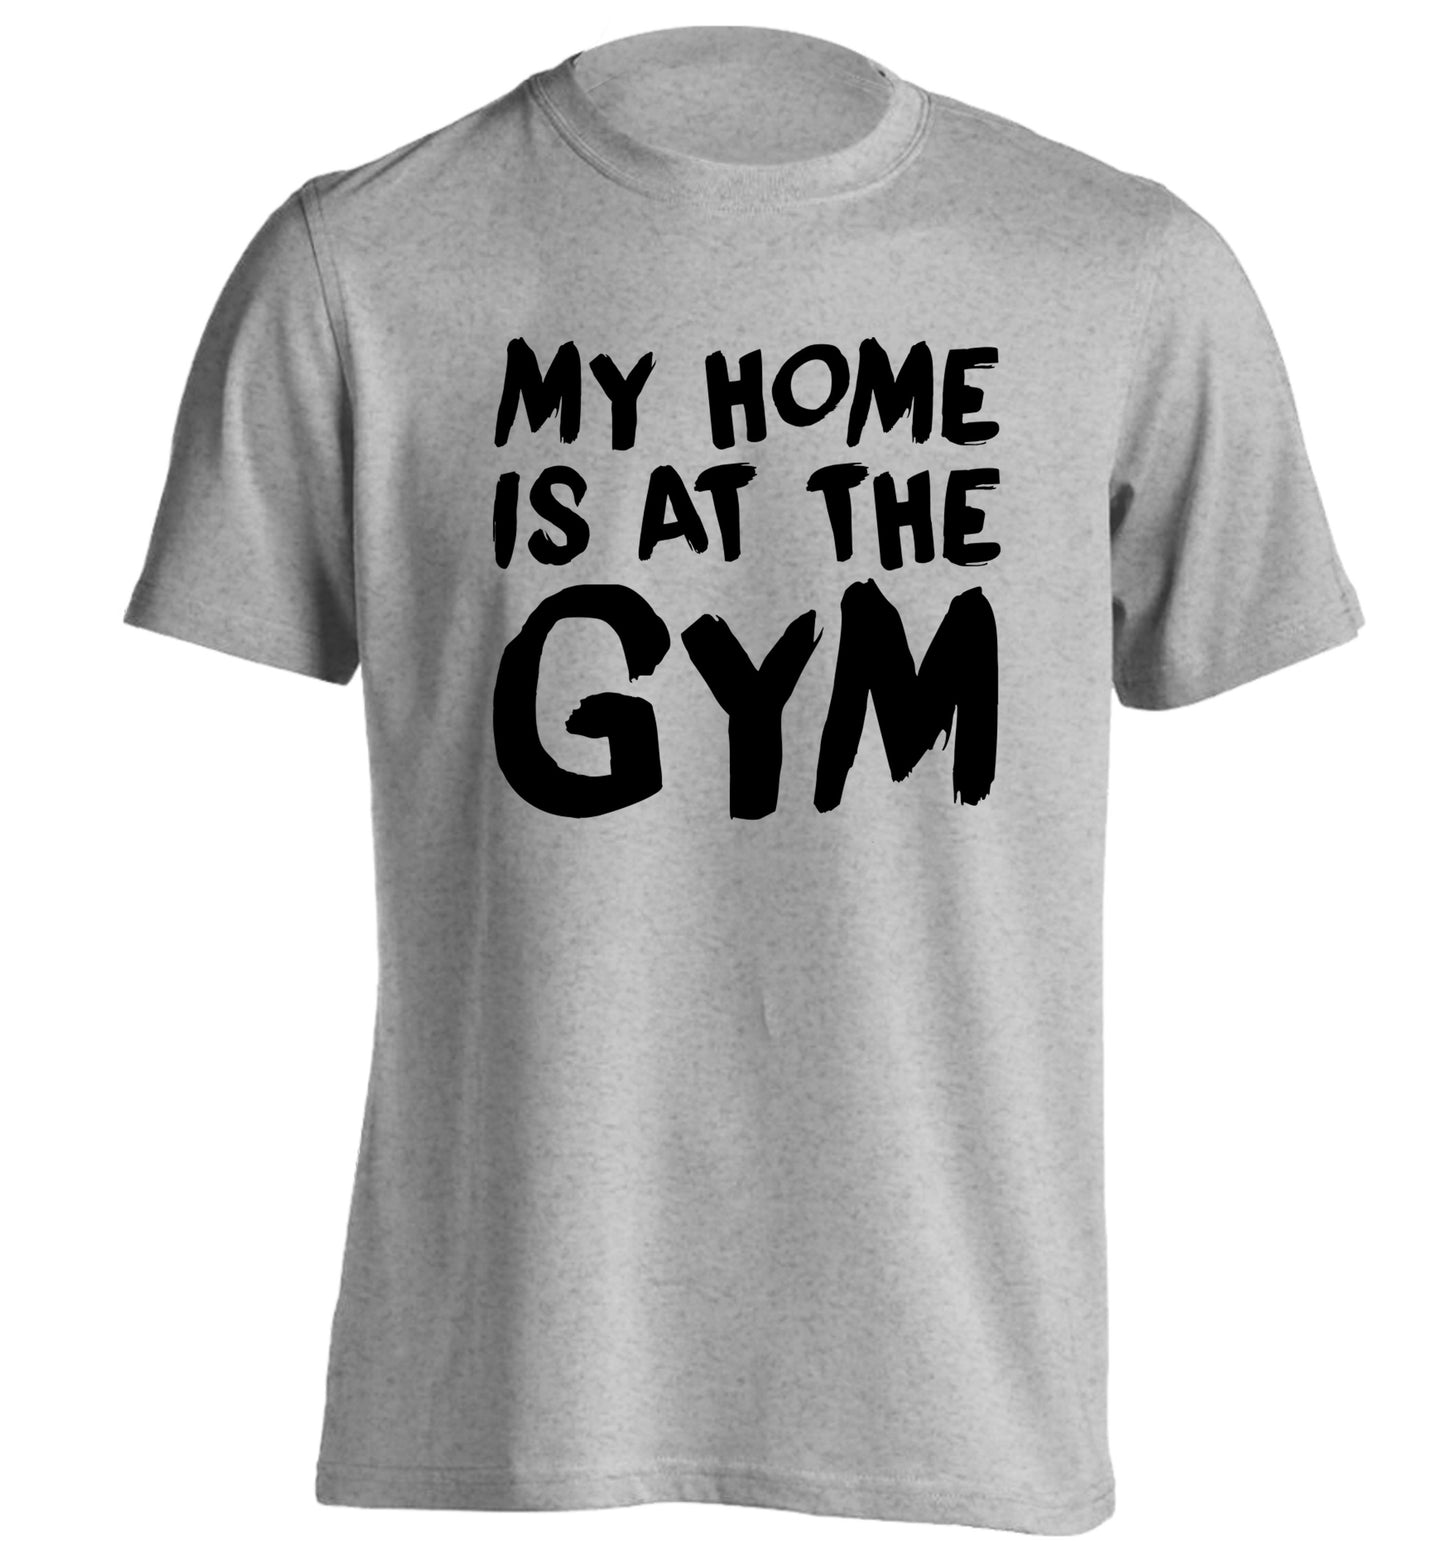 My home is at the gym adults unisex grey Tshirt 2XL